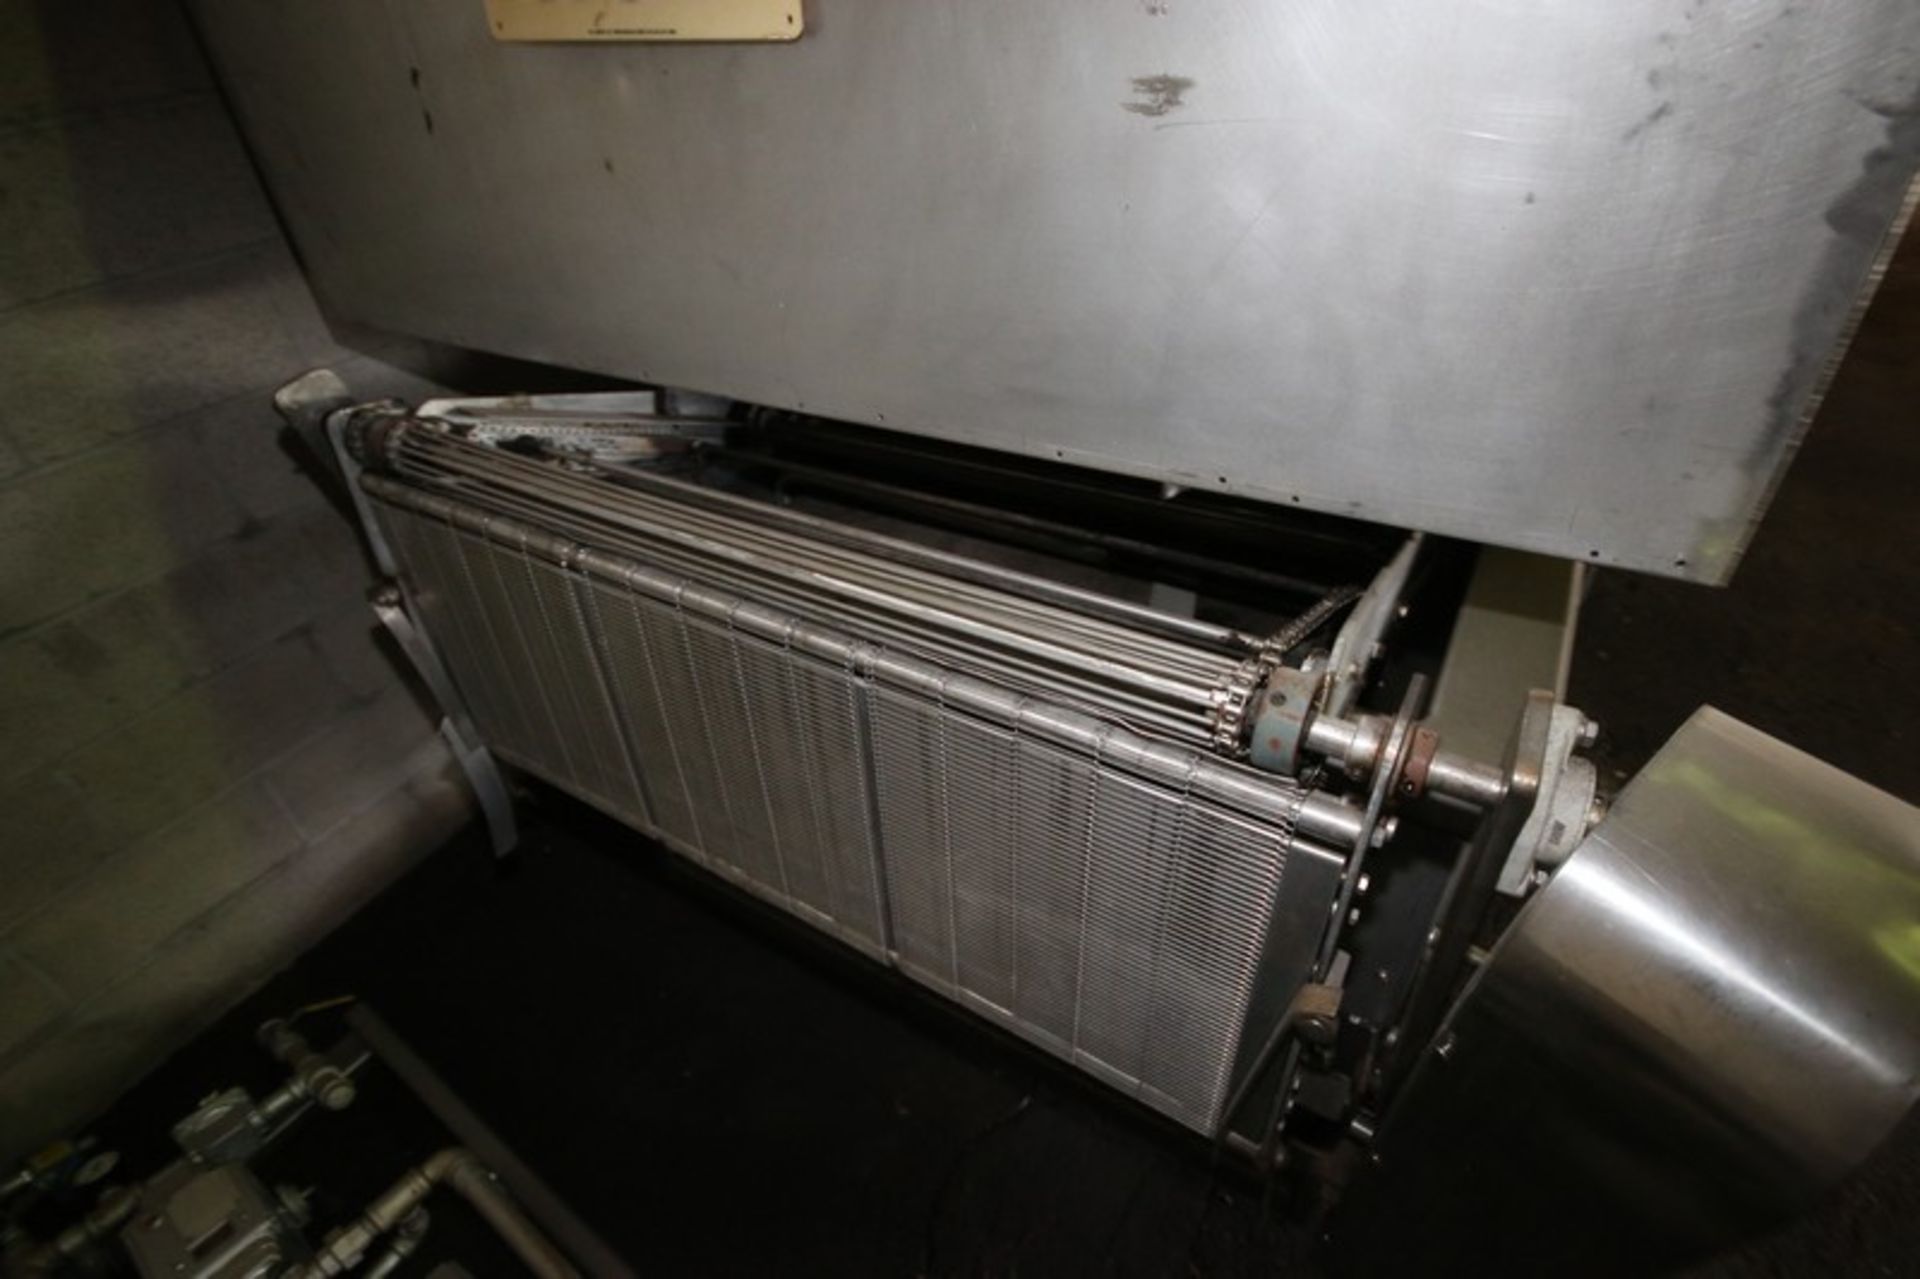 Higgs S/S Conveyor Bakery Fryer,Natural Gas Heated, 14' L x 54"W, Includes Exhaust Hood & Control - Image 7 of 11